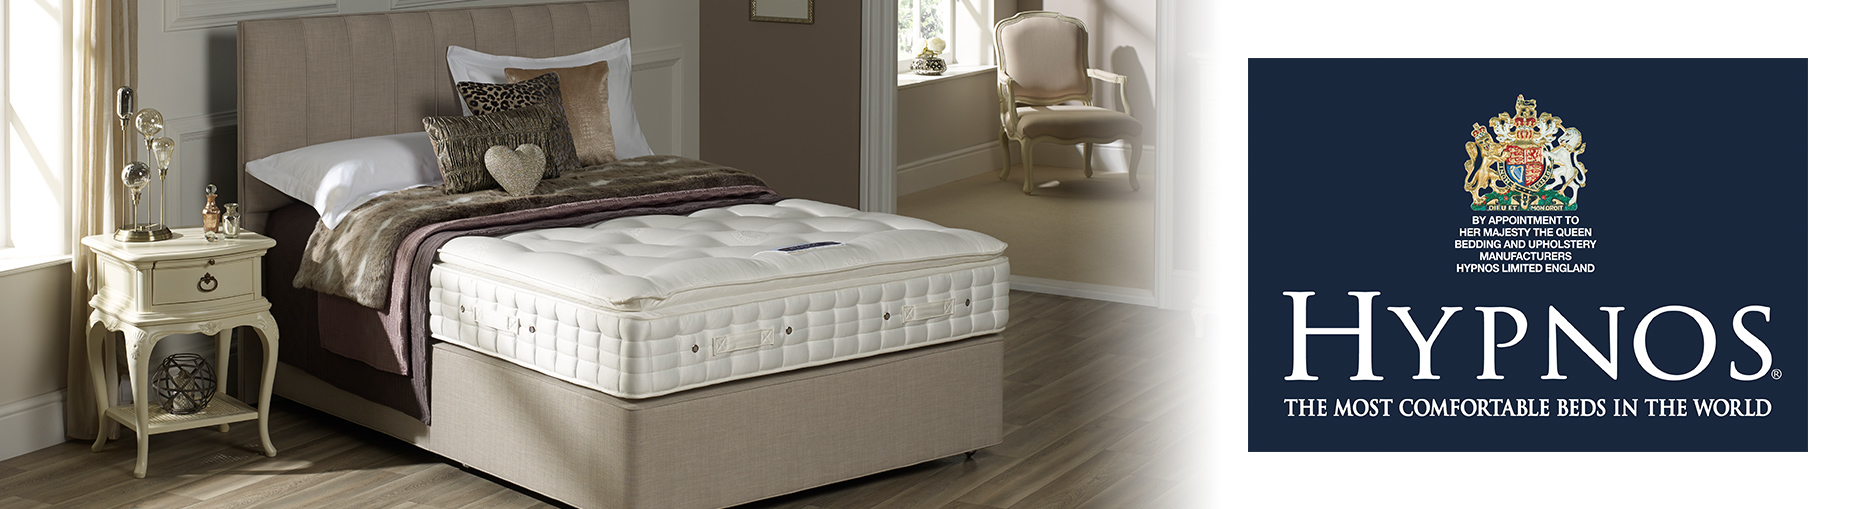 Hypnos Beds at Forrest Furnishing